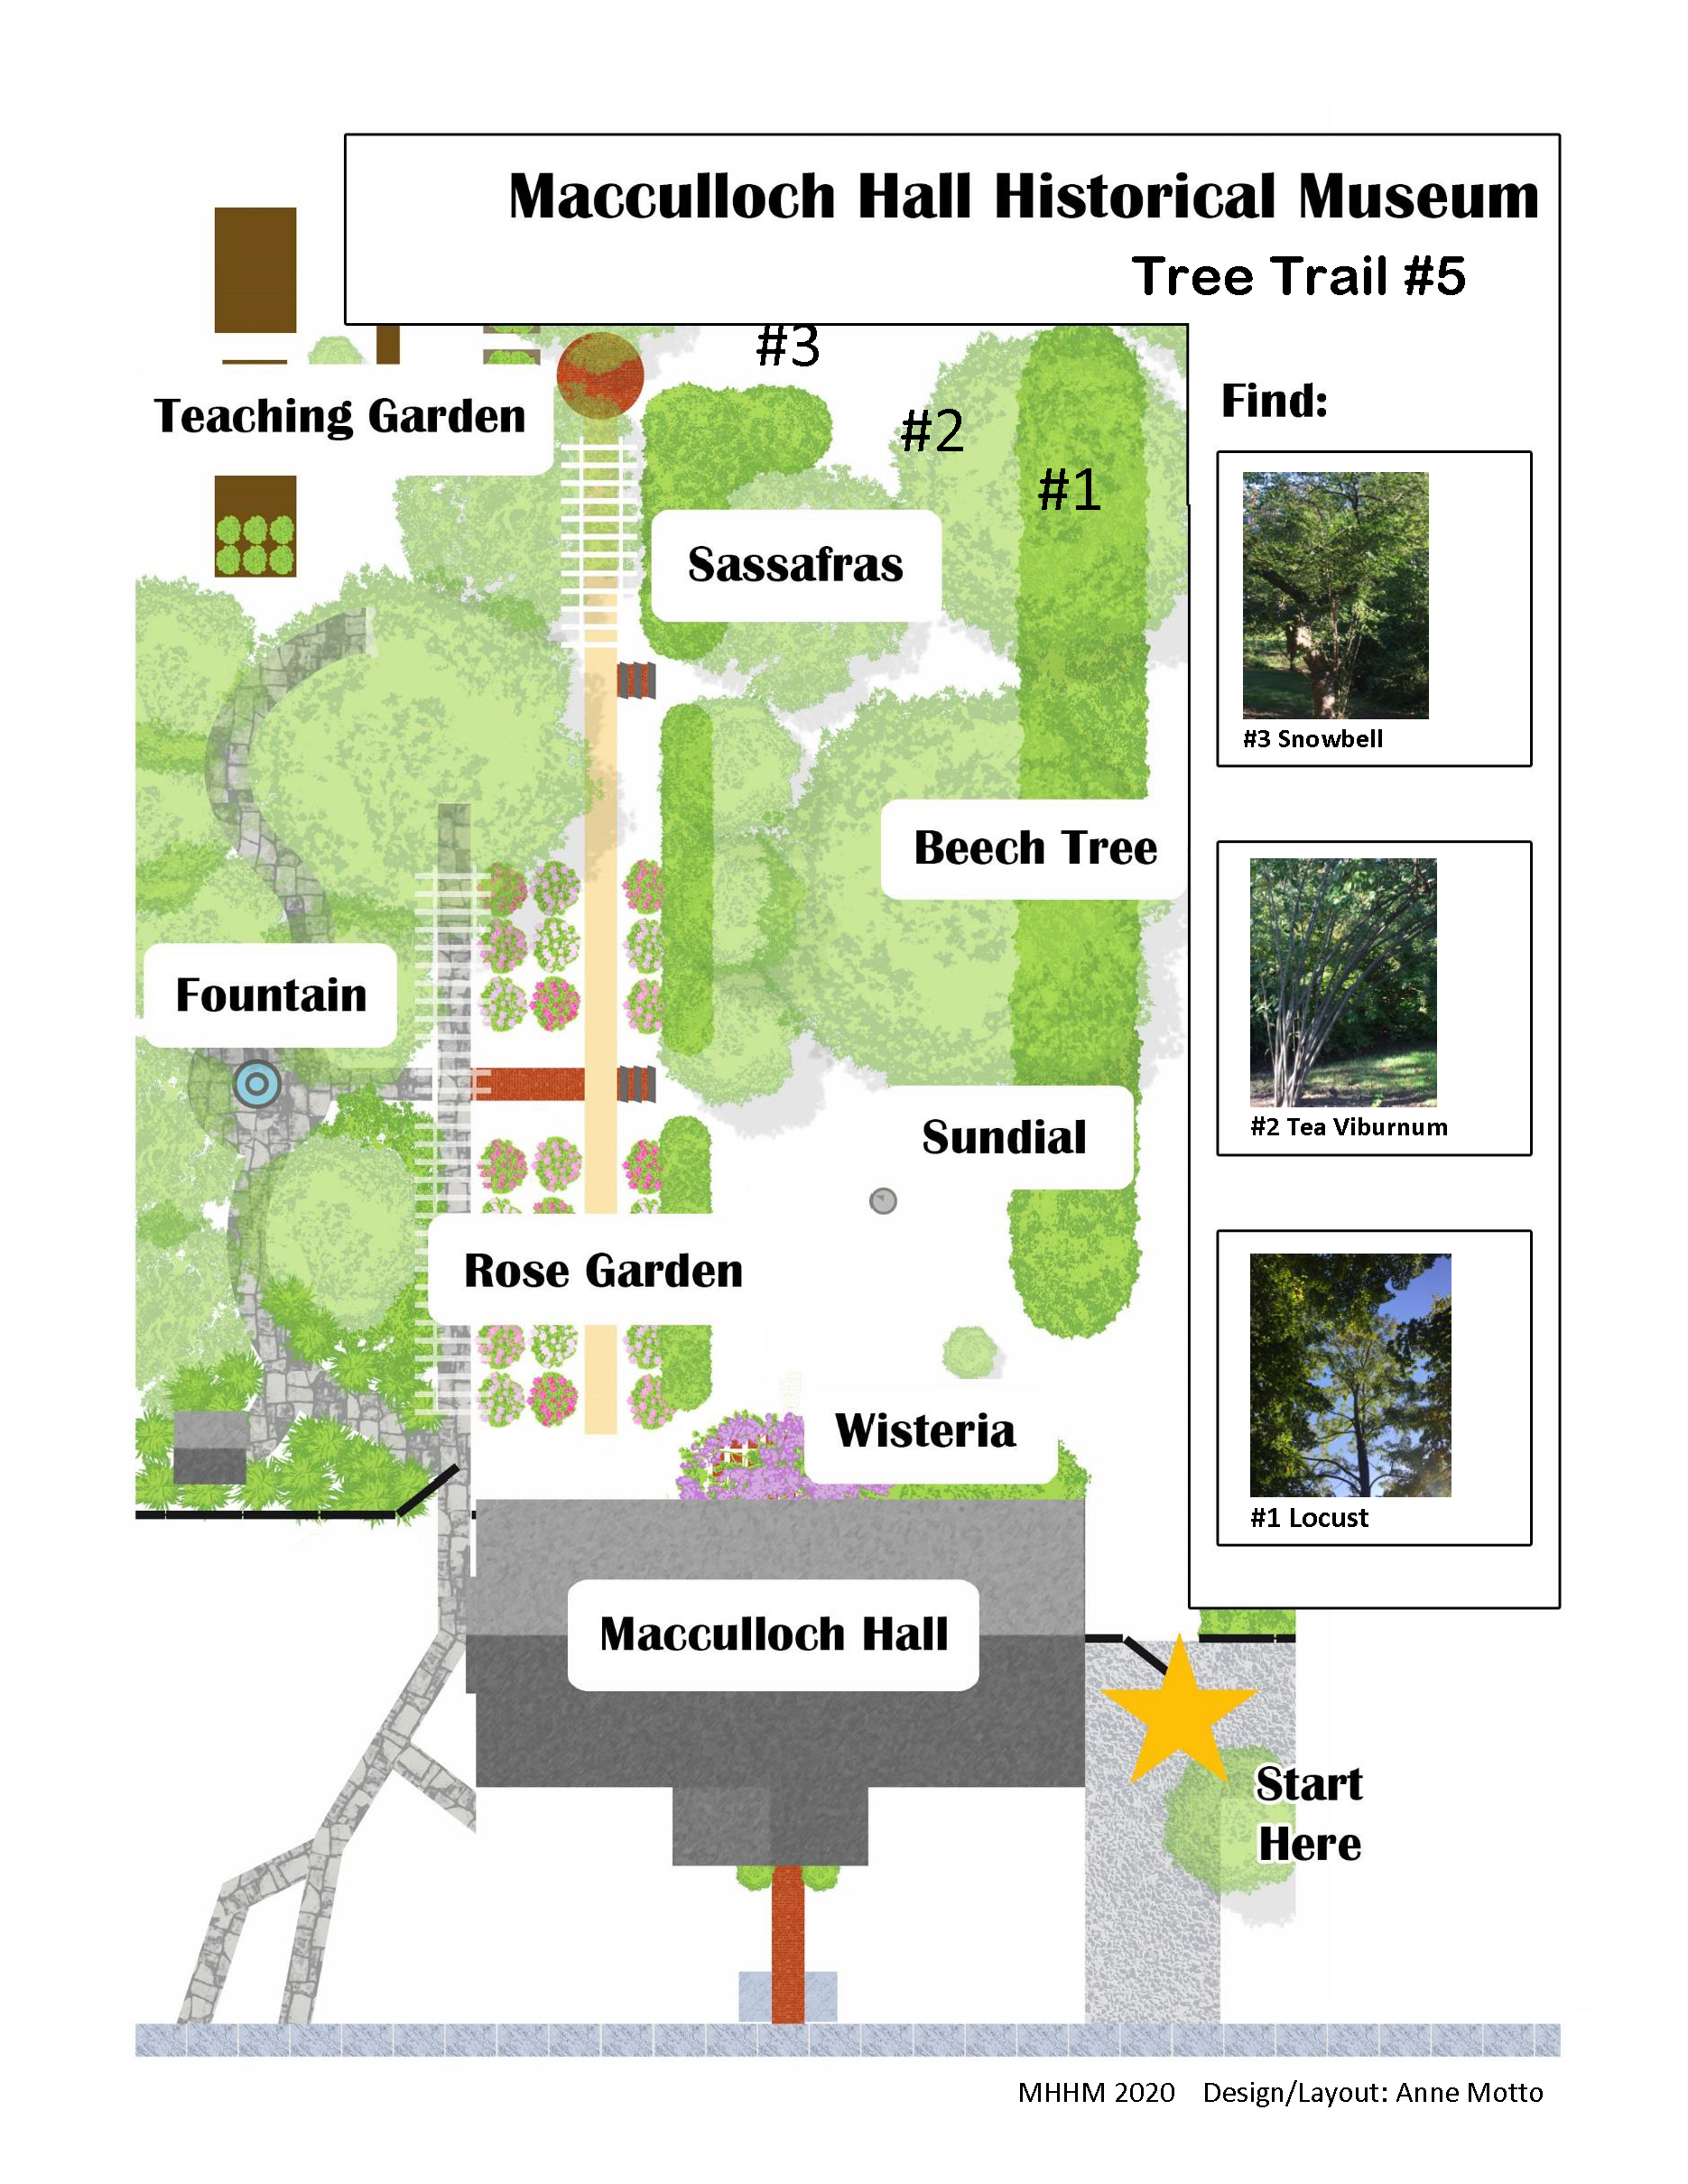 A graphic map of the Macculloch Hall gardens with a tree finding activity.